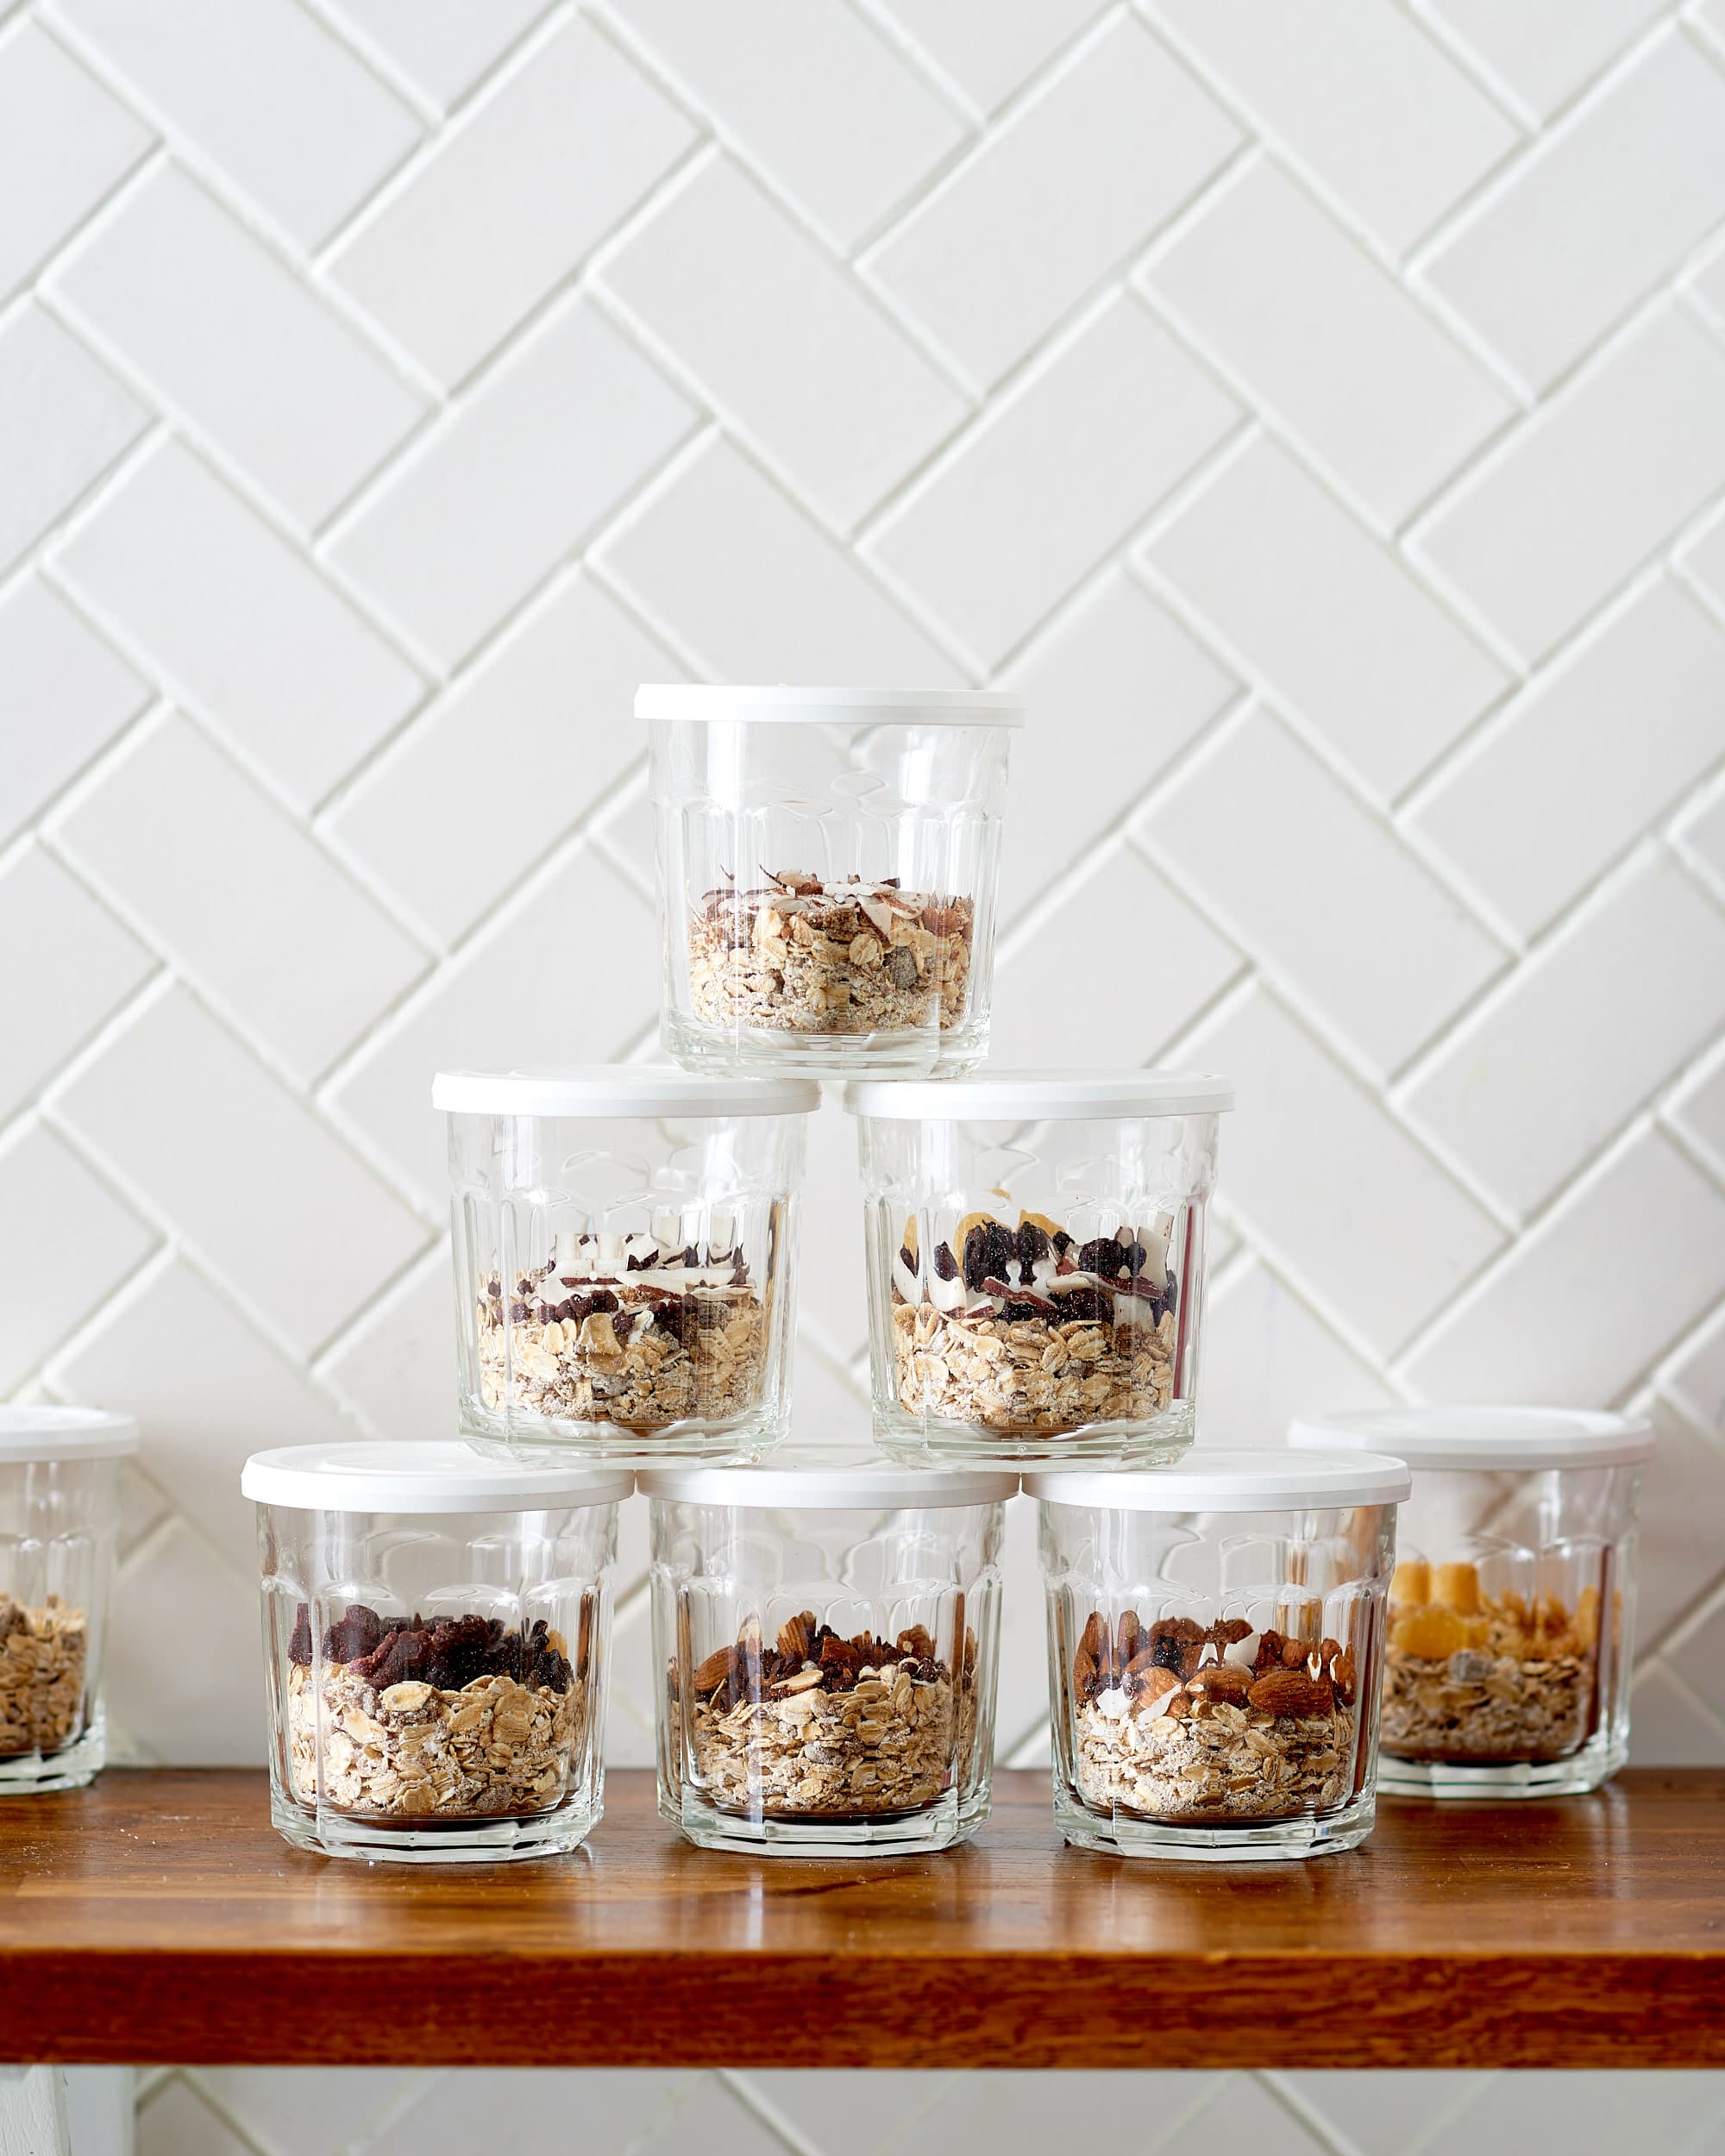 10oz Overnight Oats Jars with Lid and Spoon Overnight Oats Container and  Bento Bag for Cereal Milk Fruit Salad Refrigerated Storage - China  Overnight Oats Containers and Overnight Oats Jars price